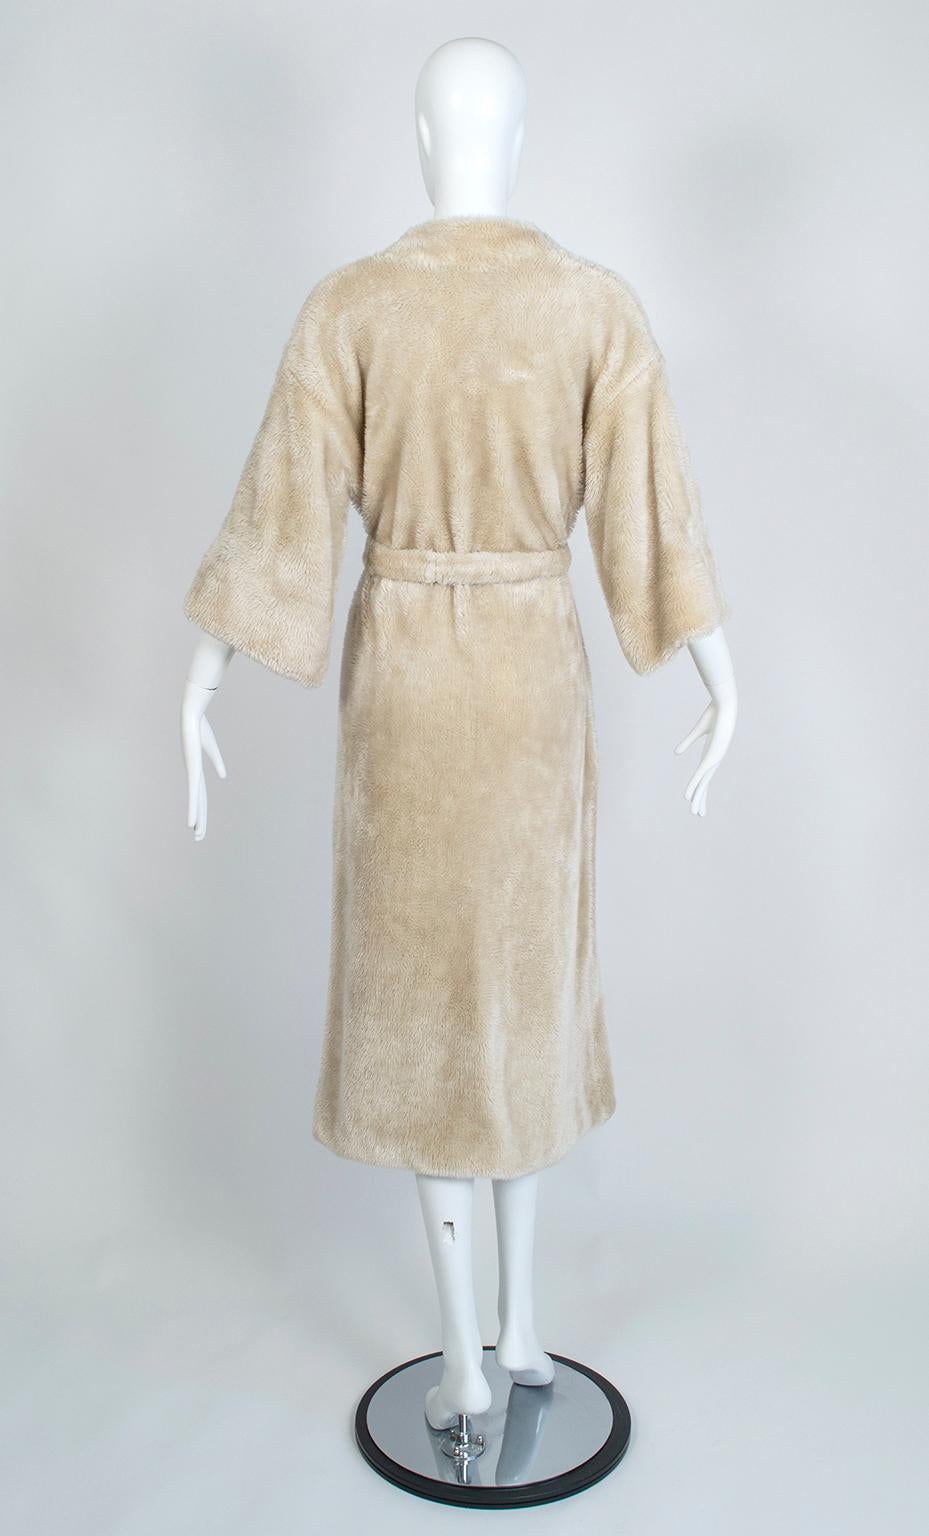 Reversible Ivory Faux Fur Robe w Leonard Paris-Inspired Jungle Lining - M, 1960s For Sale 1